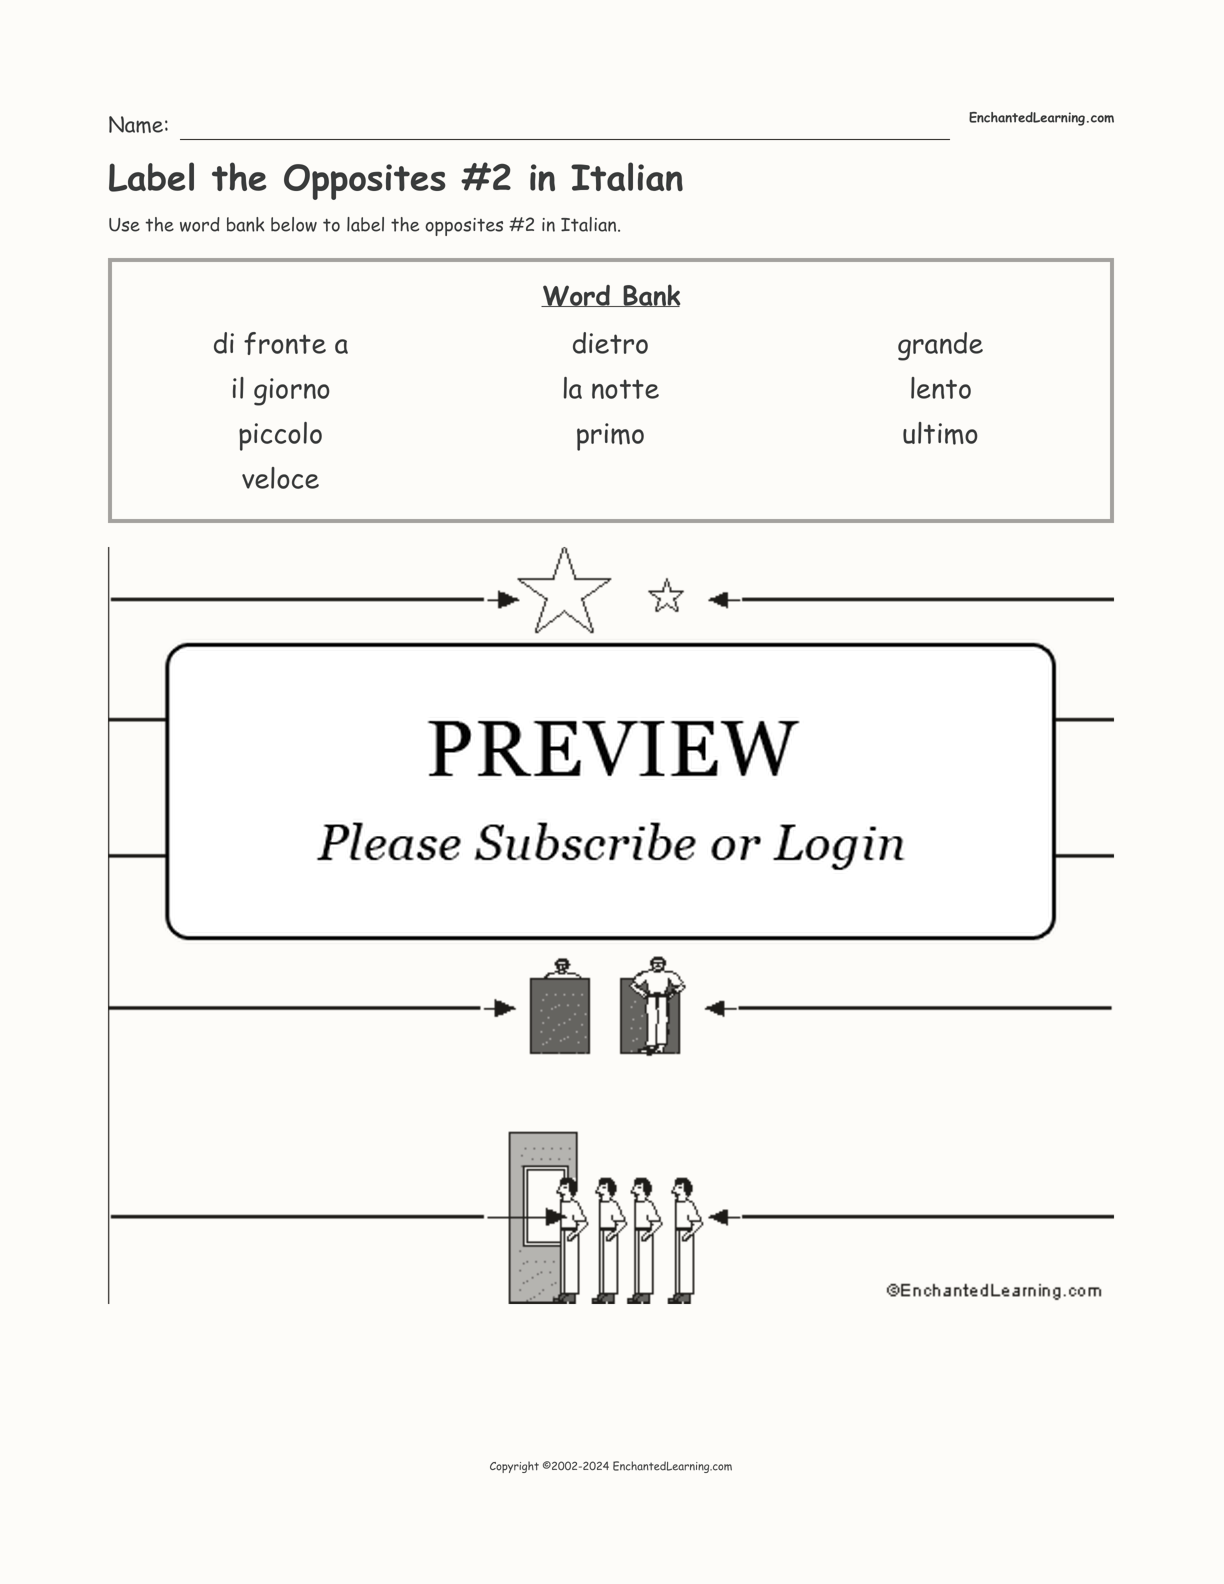 Label the Opposites #2 in Italian interactive worksheet page 1